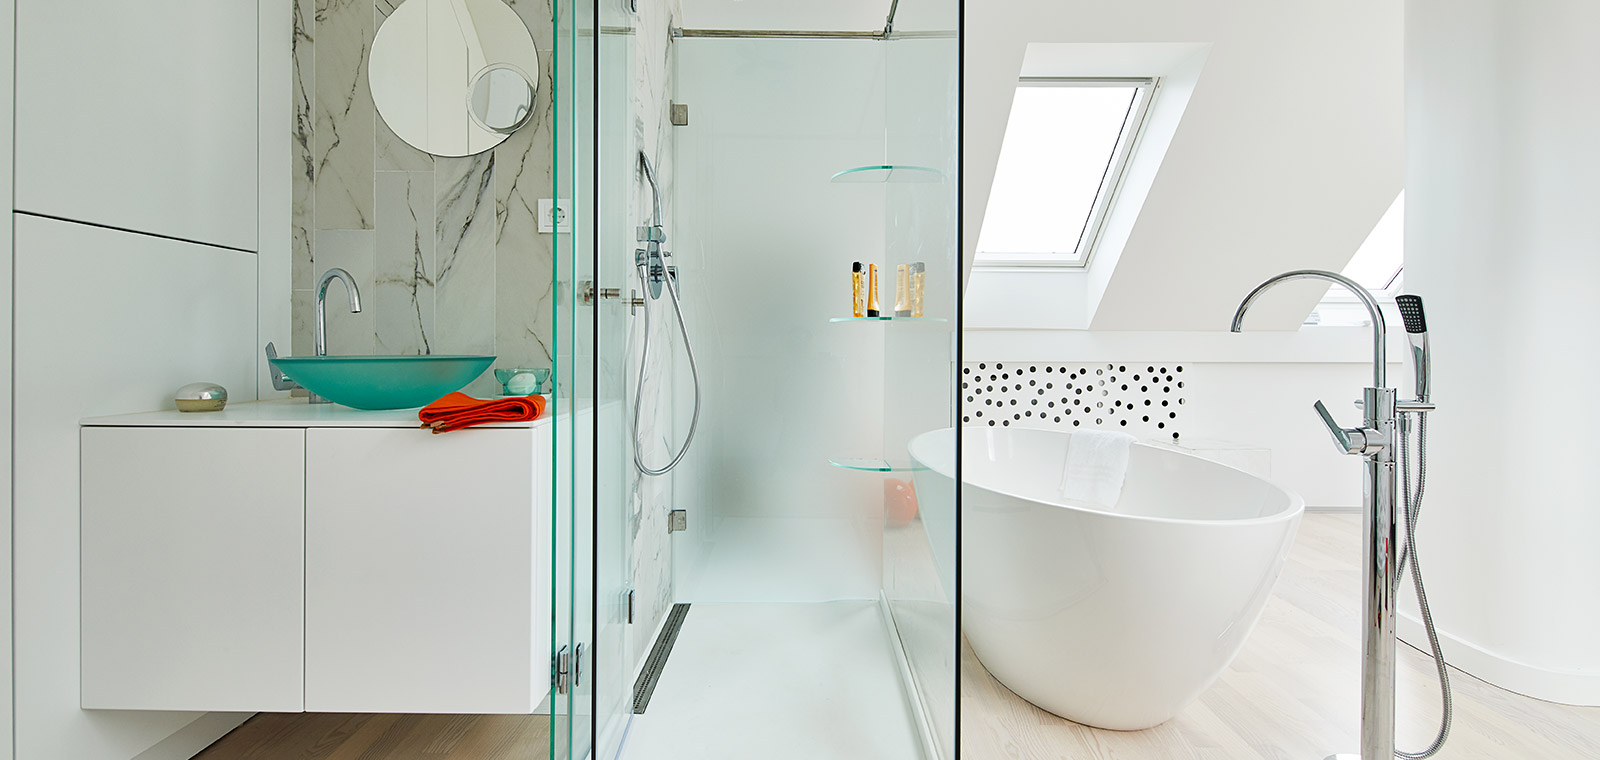 White bathroom design idea in a renovated apartment located in Budapest, Hungary